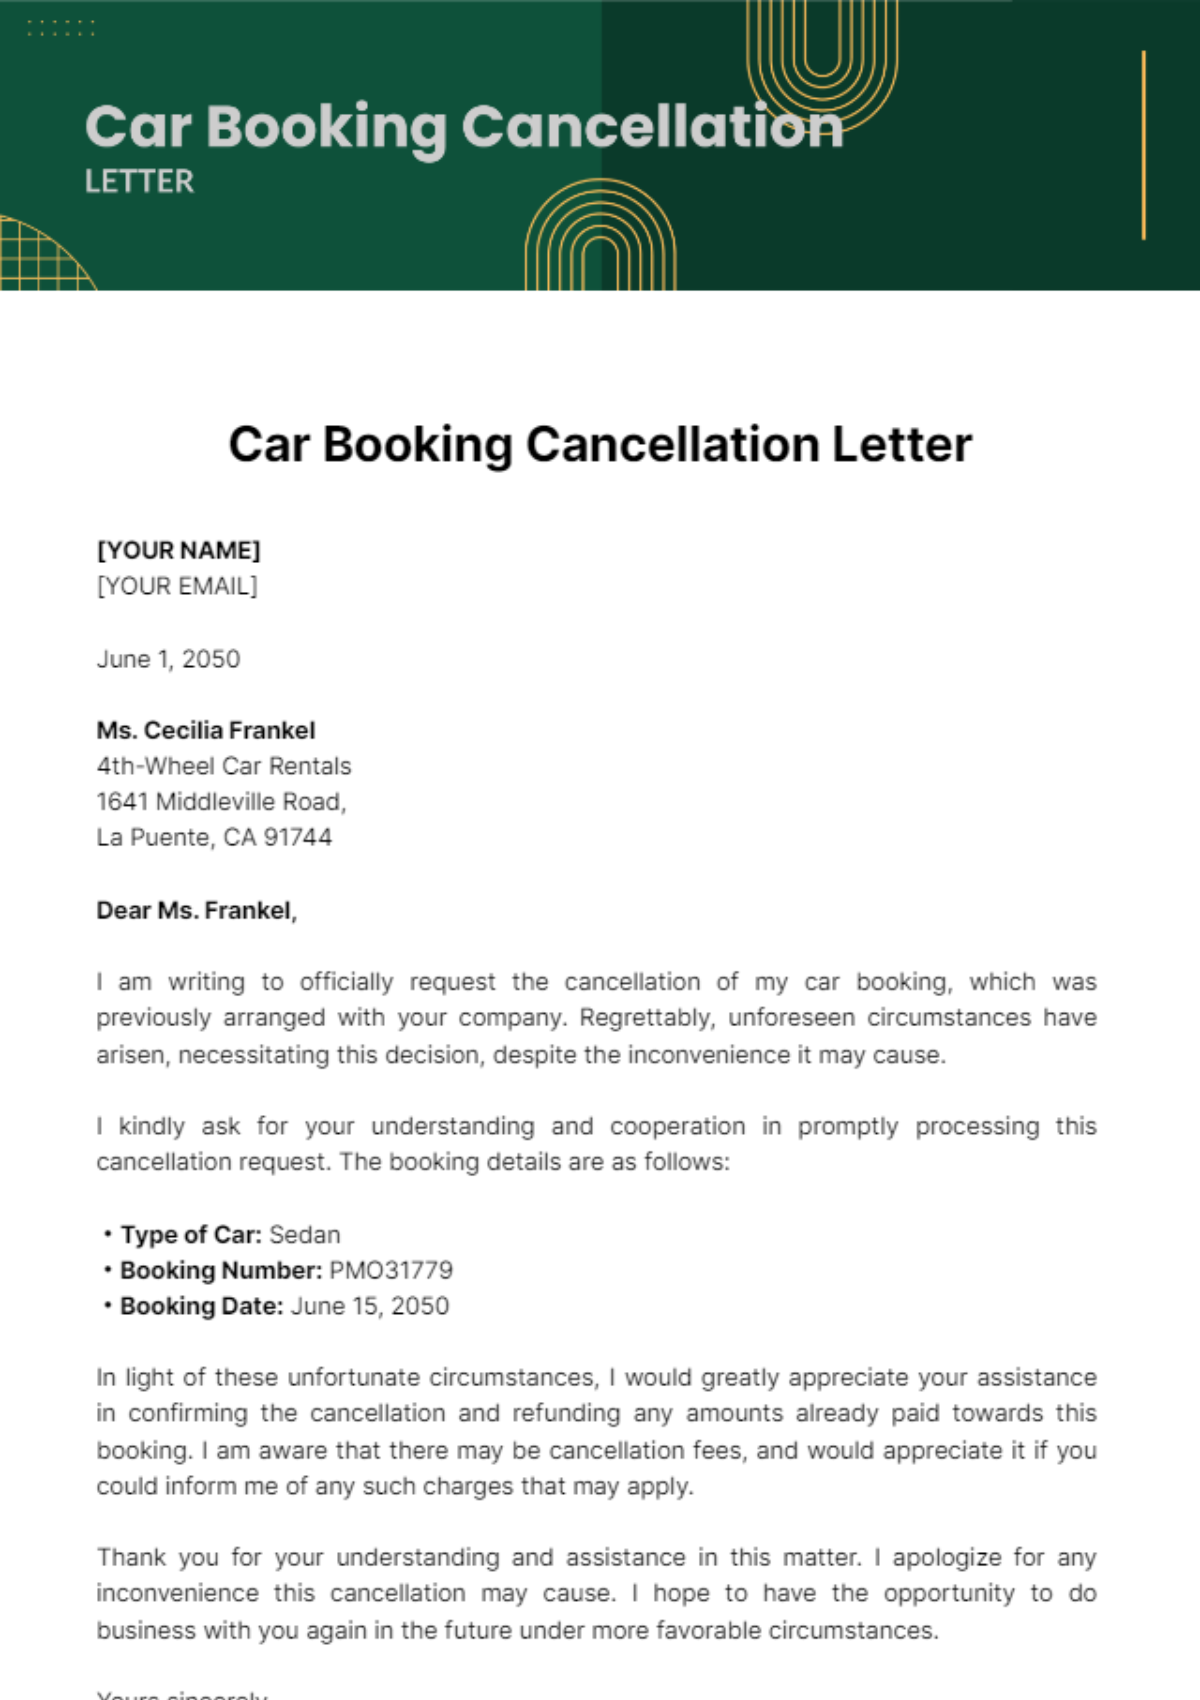 Free Car Booking Cancellation Letter Template